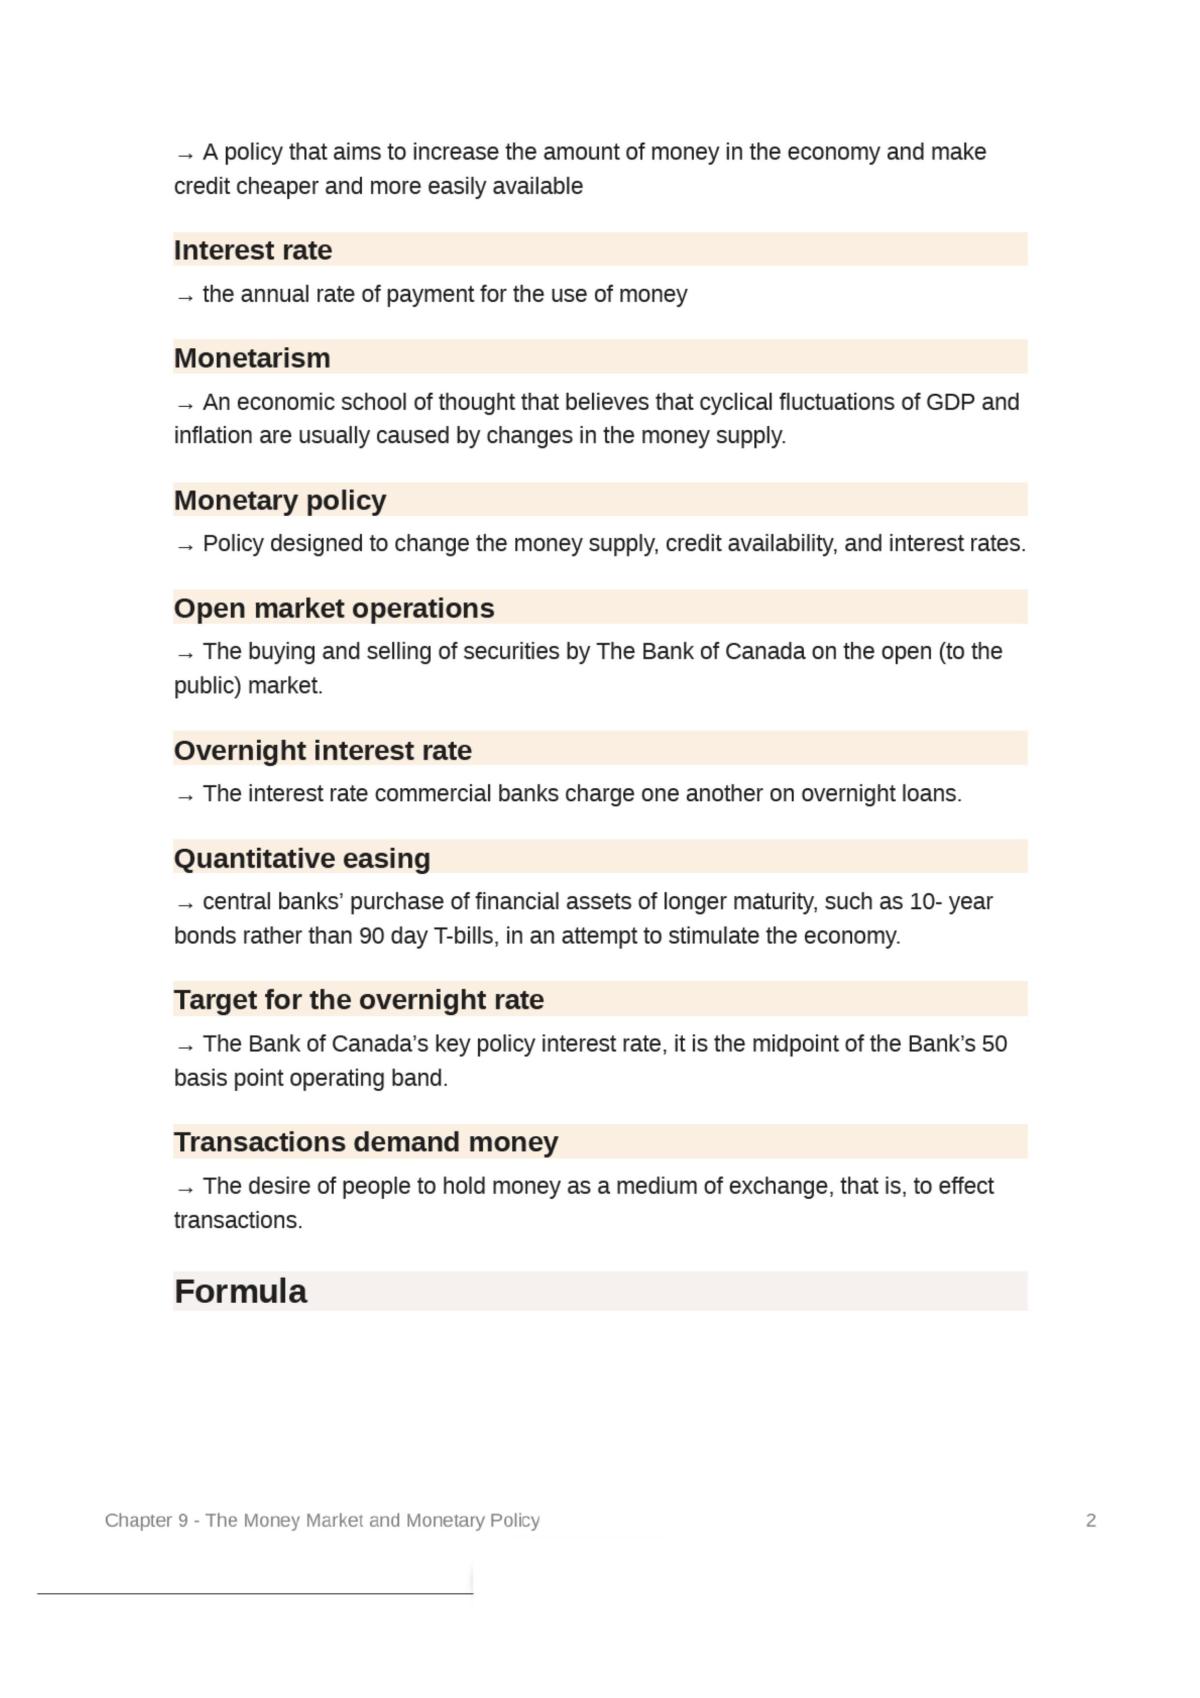 The Money Market and Monetary Policy Notes - Page 2